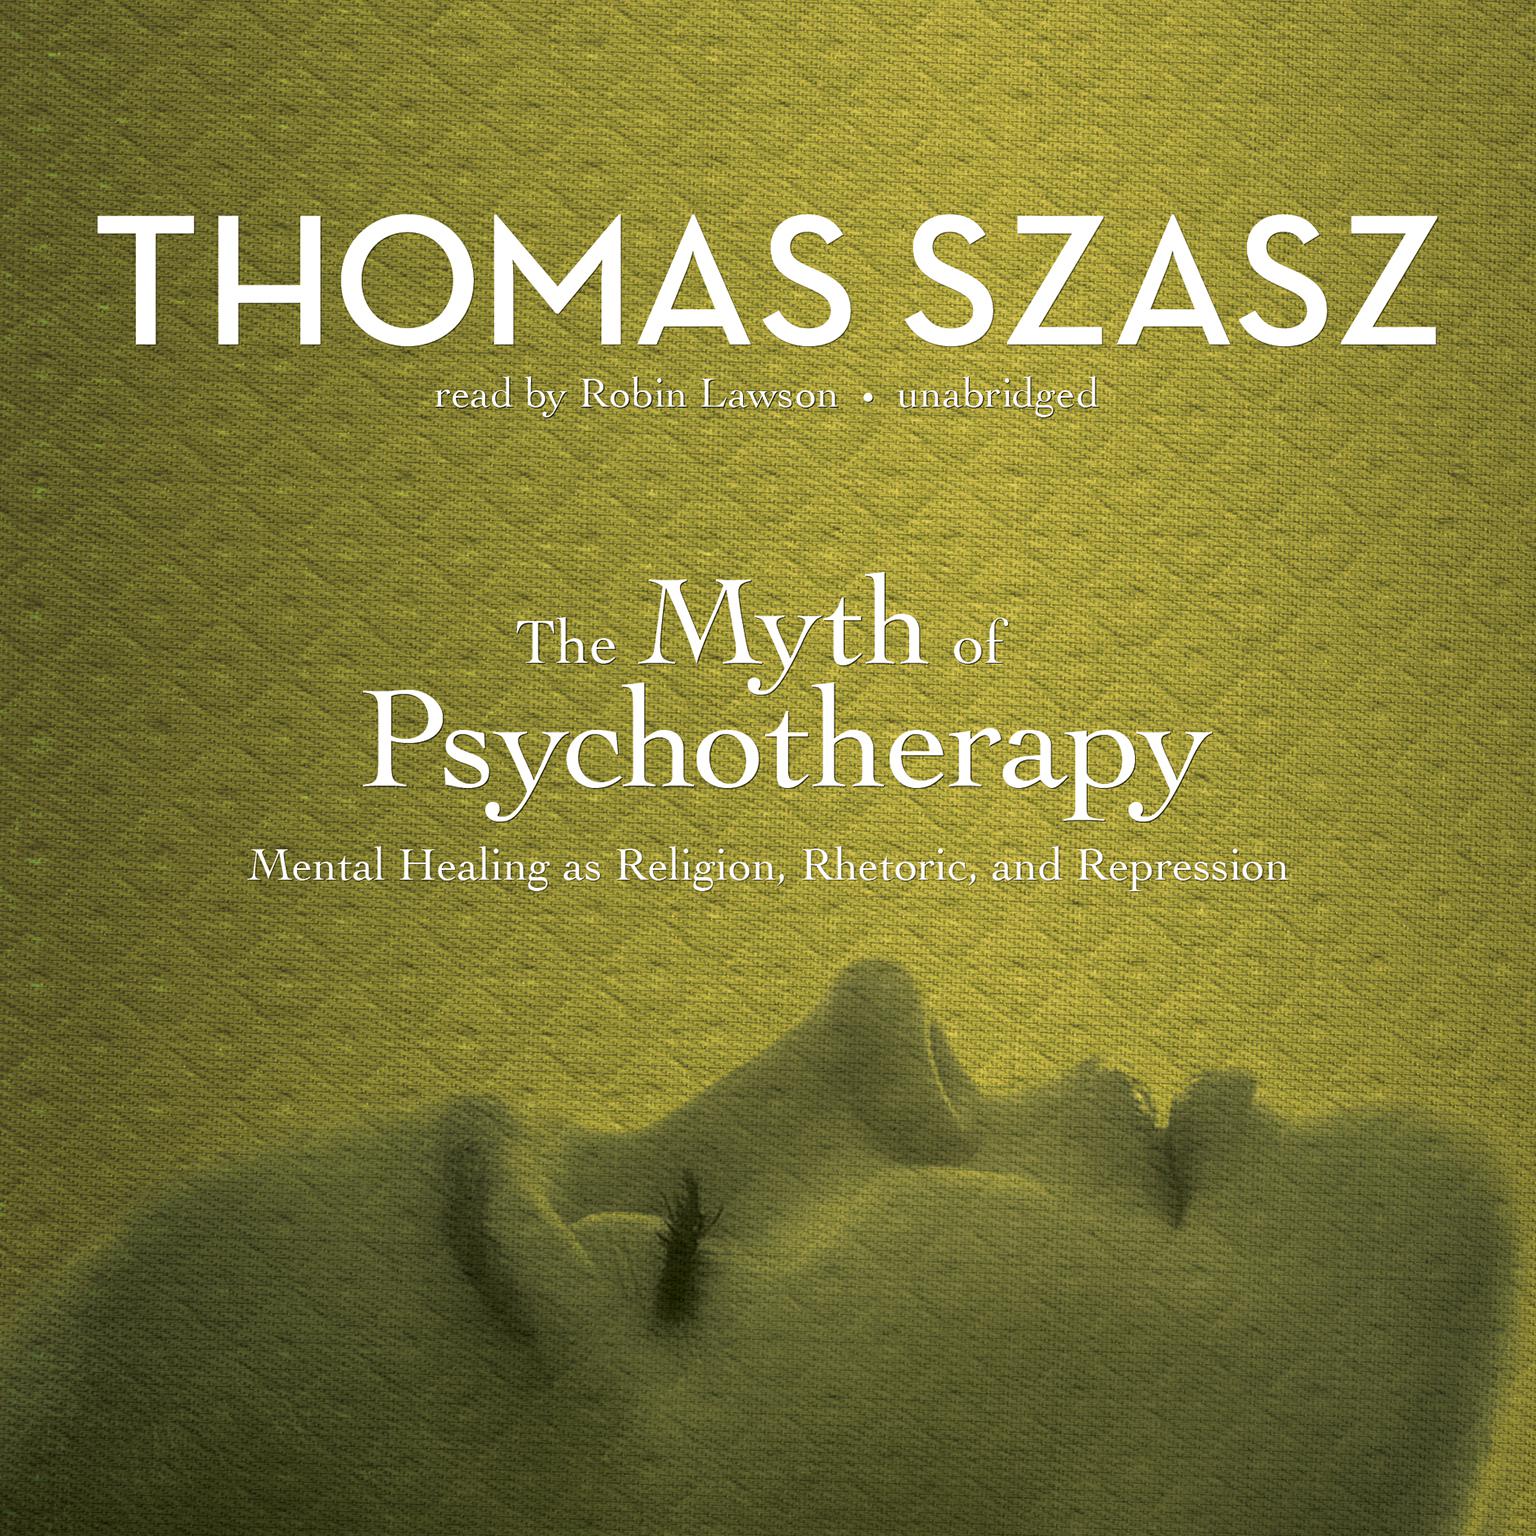 The Myth of Psychotherapy: Mental Healing as Religion, Rhetoric, and Repression Audiobook, by Thomas Szasz